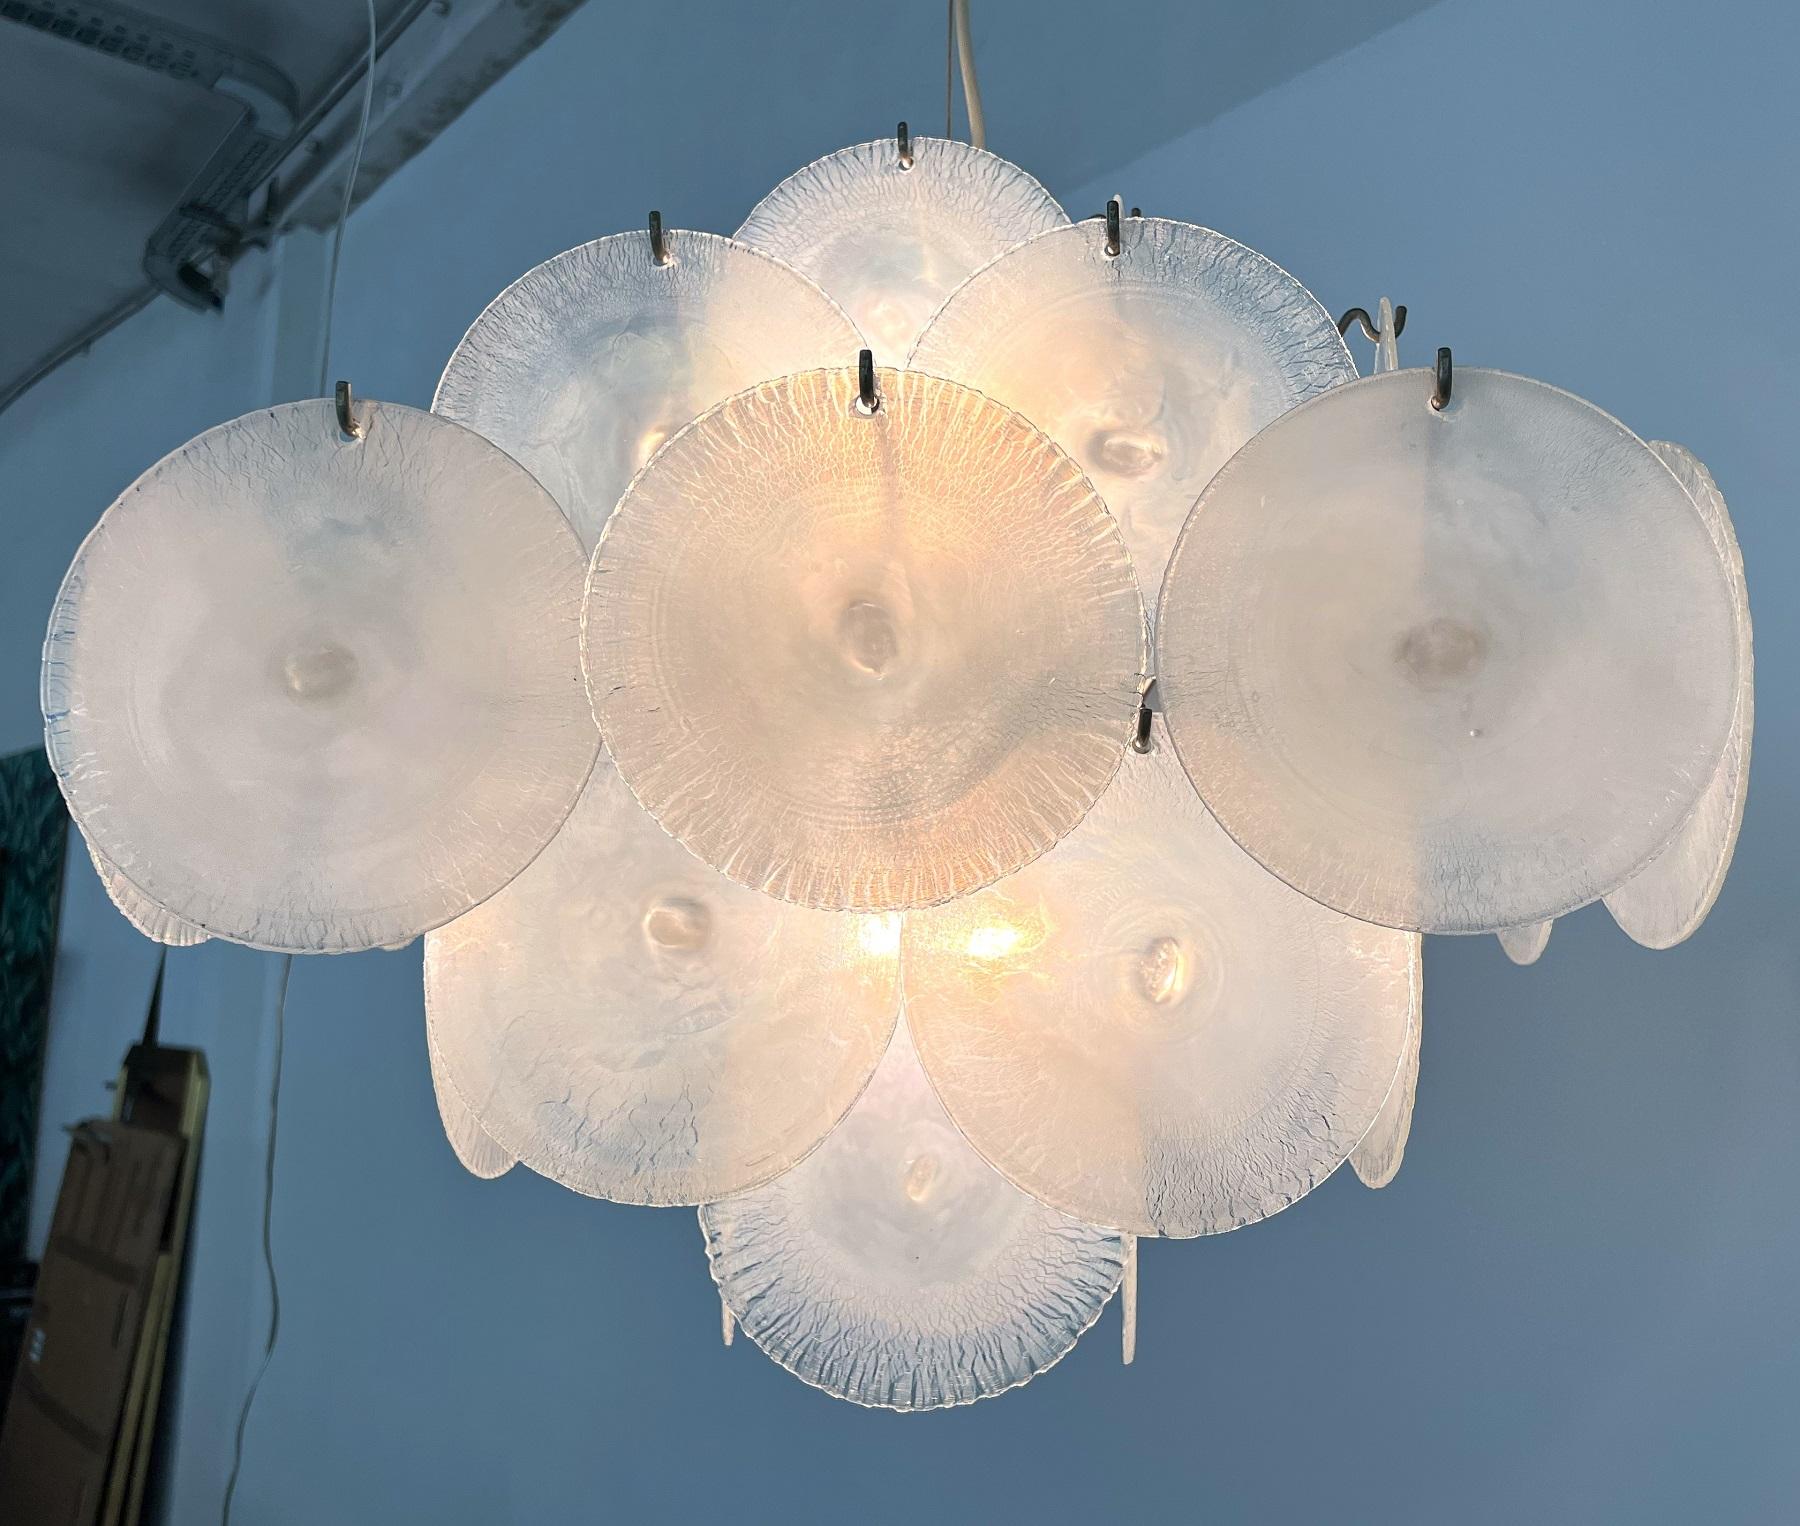 Magnificent, original vintage chandelier designed from Carlo Nason and manufactured in Murano from Mazzega in the 1970s.
This chandelier is made of s solid lamp's base in nickel with 36 hooks and the matching ceiling rose, hold from a steel cable